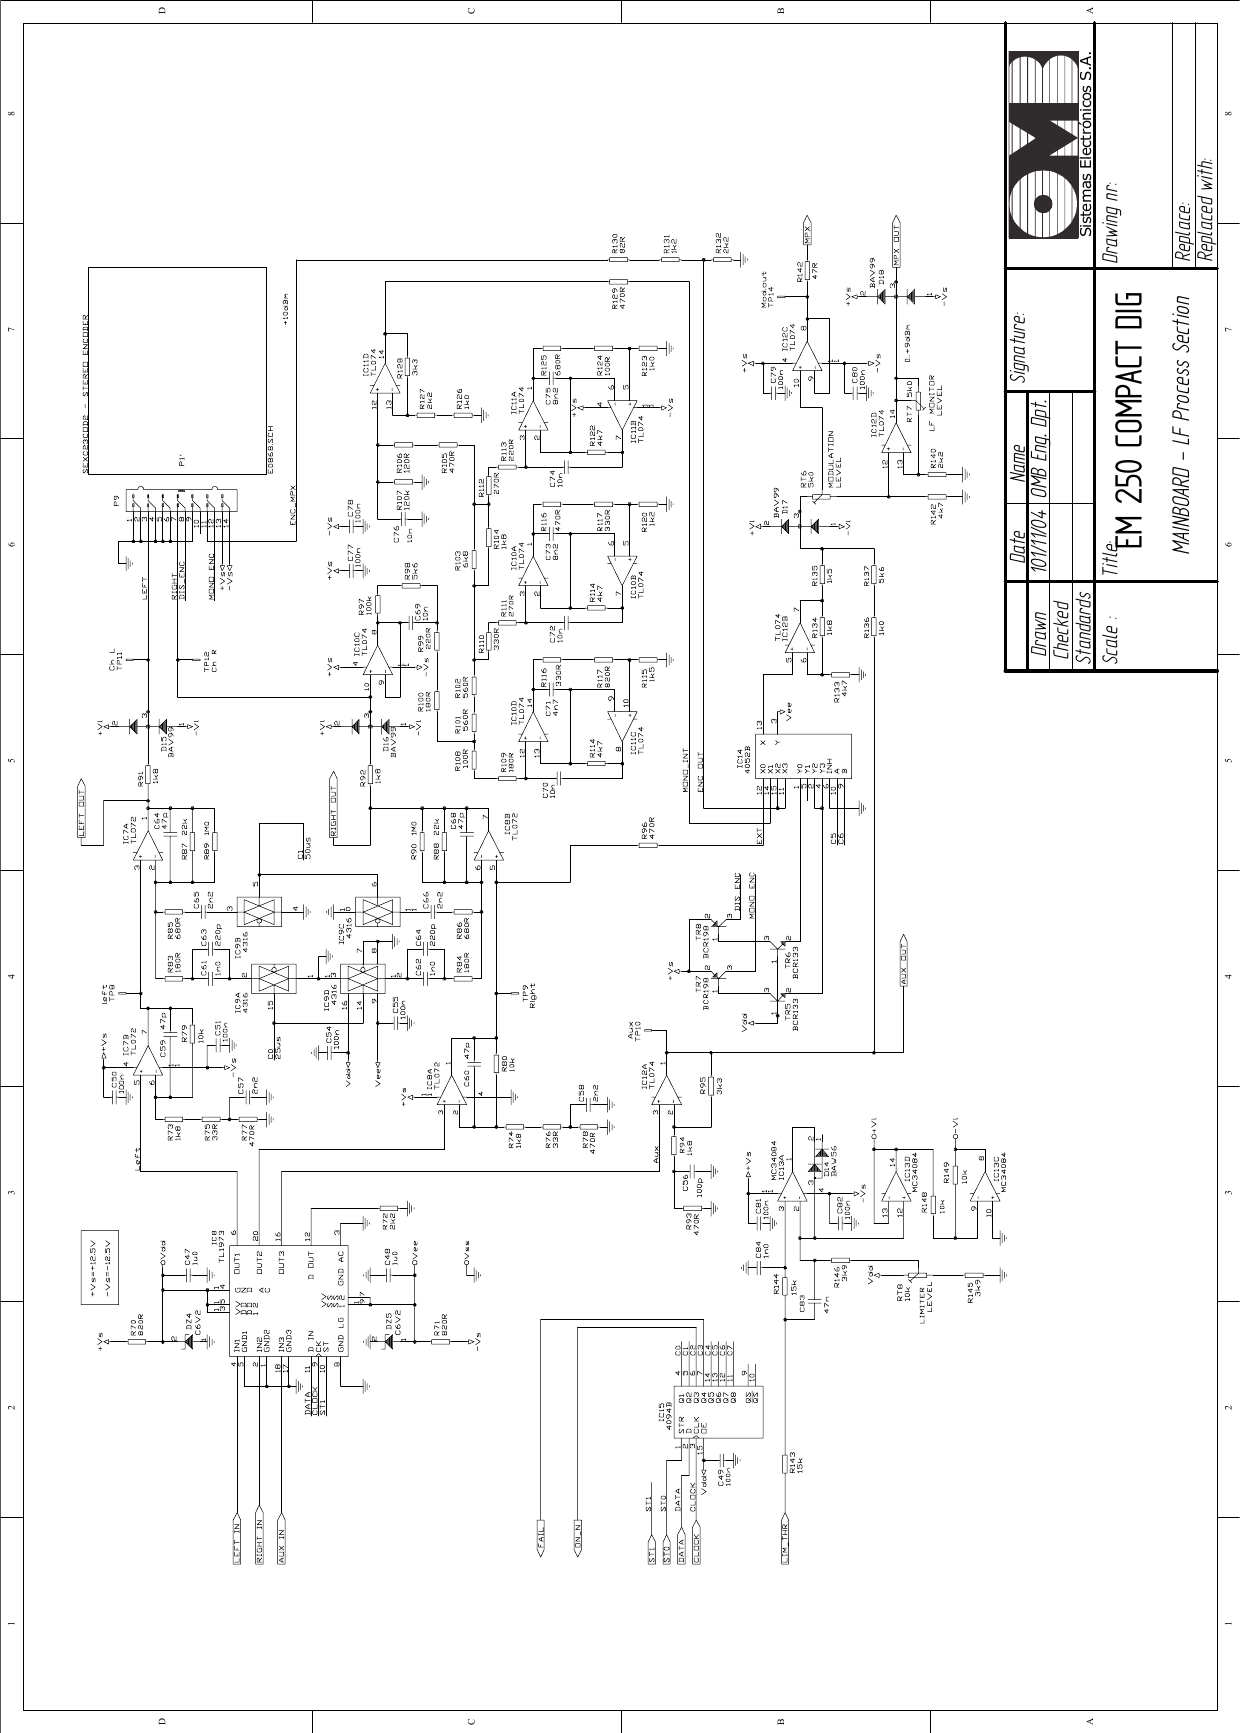 101/11/04  OMB Eng. Dpt. EM 250 COMPACT DIG MAINBOARD - LF Process Section 1 2 3 4 5 6 78ABCD87654321DCBADrawnCheckedStandardsDate Name Signature:Scale :Title: Drawing nr:Replace:Replaced with:Sistemas Electrónicos S.A.